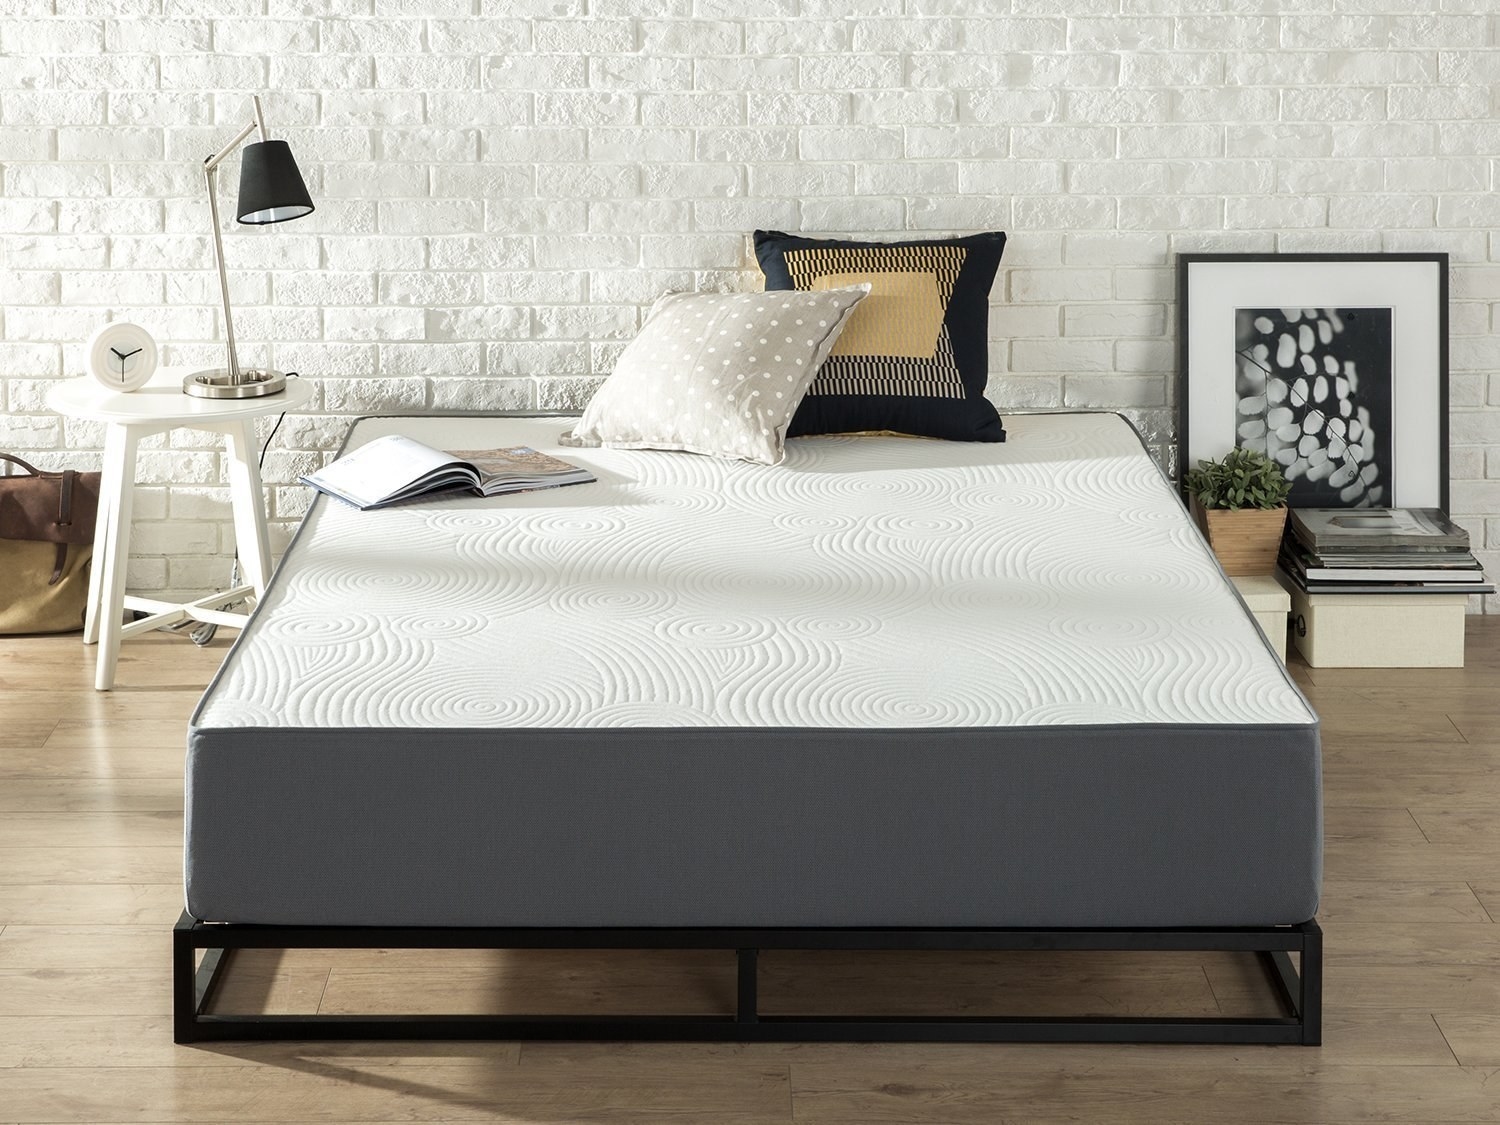 mattresses you can finance